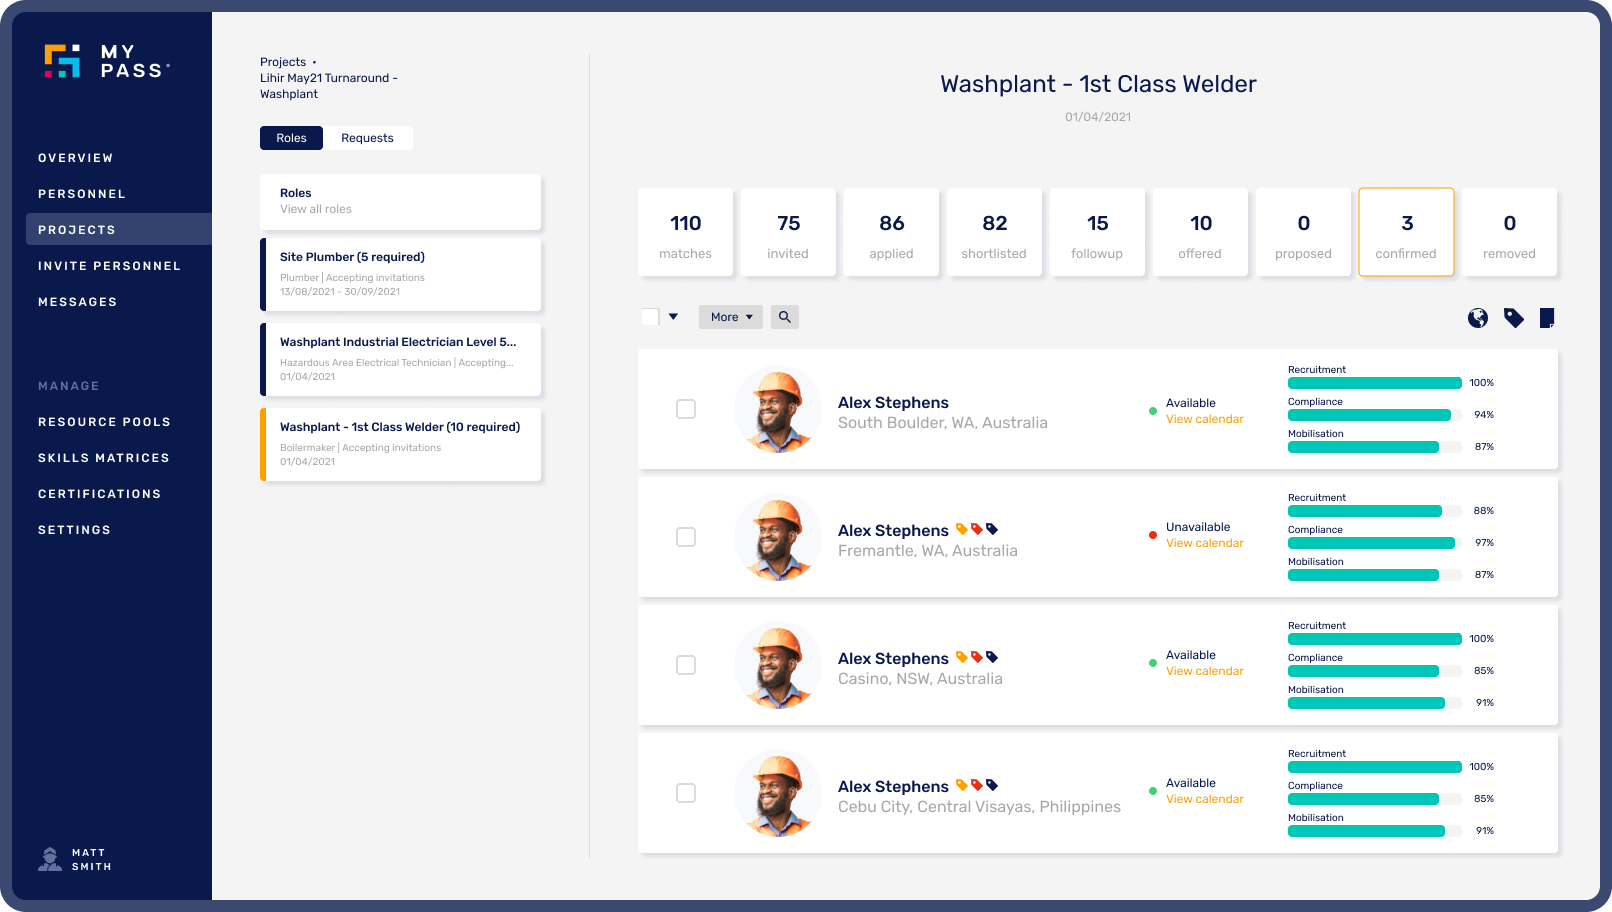 MyPass's workforce management dashboard is showing a list of welders and their compliance percentages